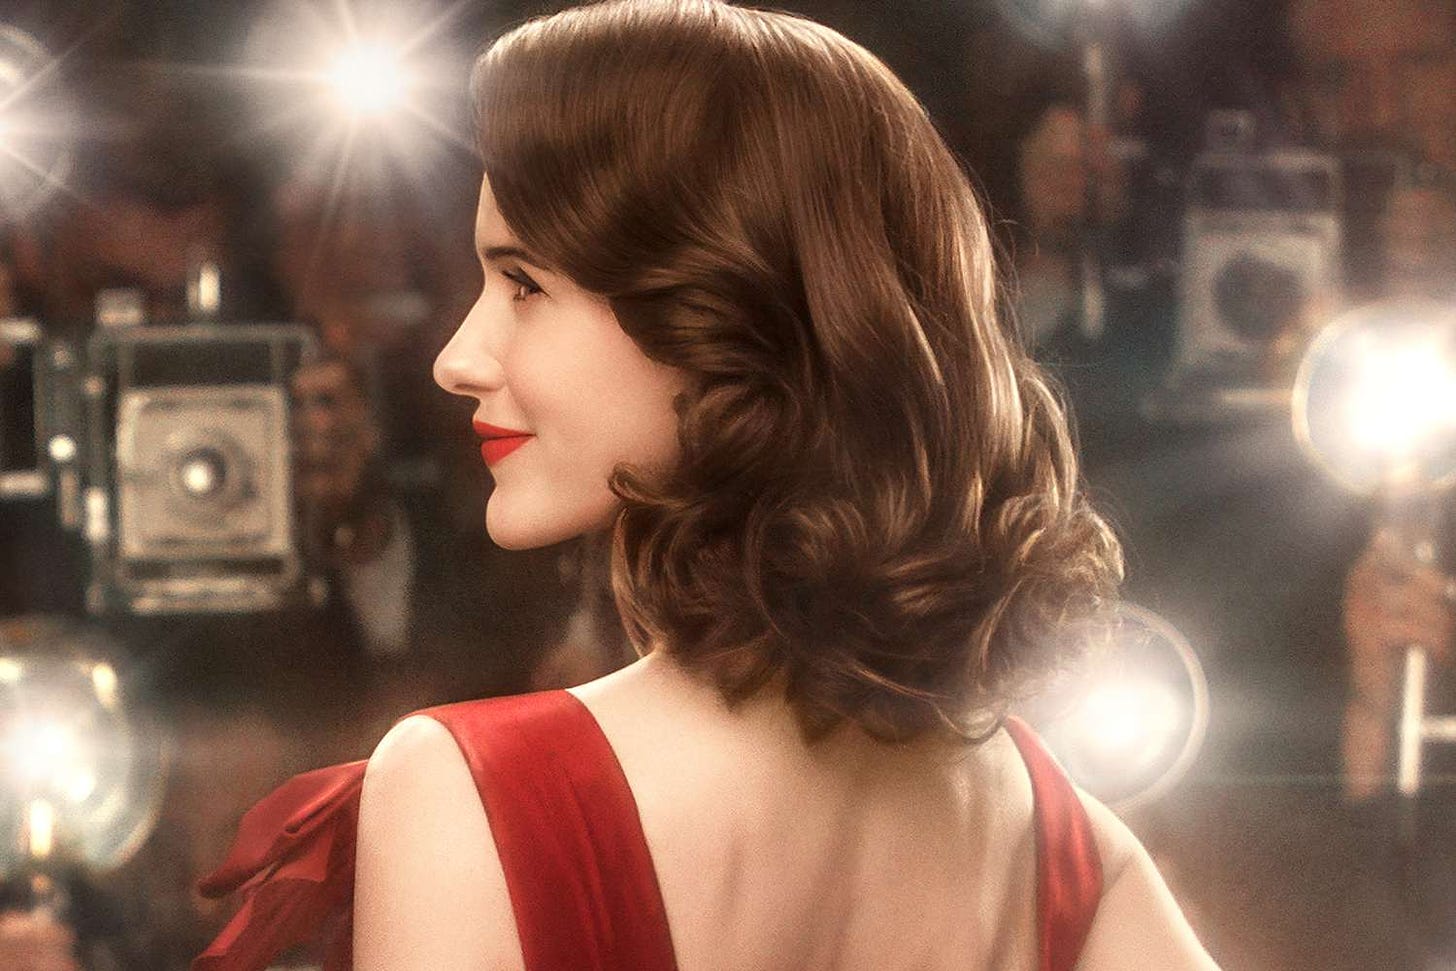 The Marvelous Mrs. Maisel's Fifth, Final Season Premieres This Spring